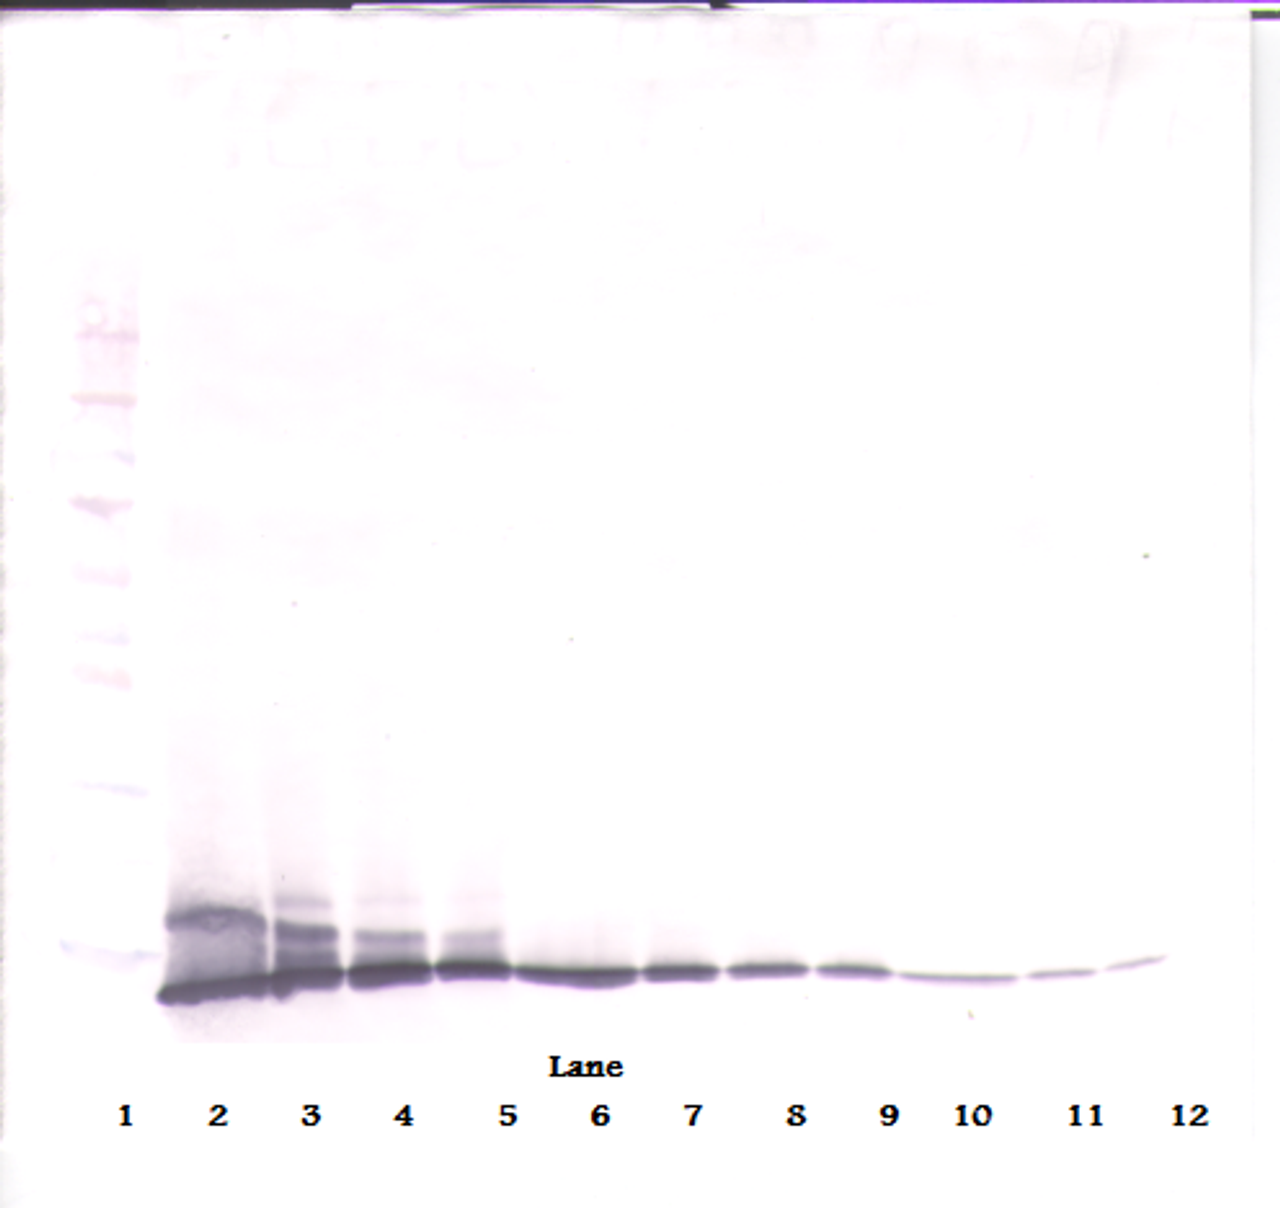 To detect Rat IL-2 by Western Blot analysis this antibody can be used at a concentration of 0.1 - 0.2 ug/ml. Used in conjunction with compatible secondary reagents the detection limit for recombinant Rat IL-2 is 1.5 - 3.0 ng/lane, under either reducing or non-reducing conditions.